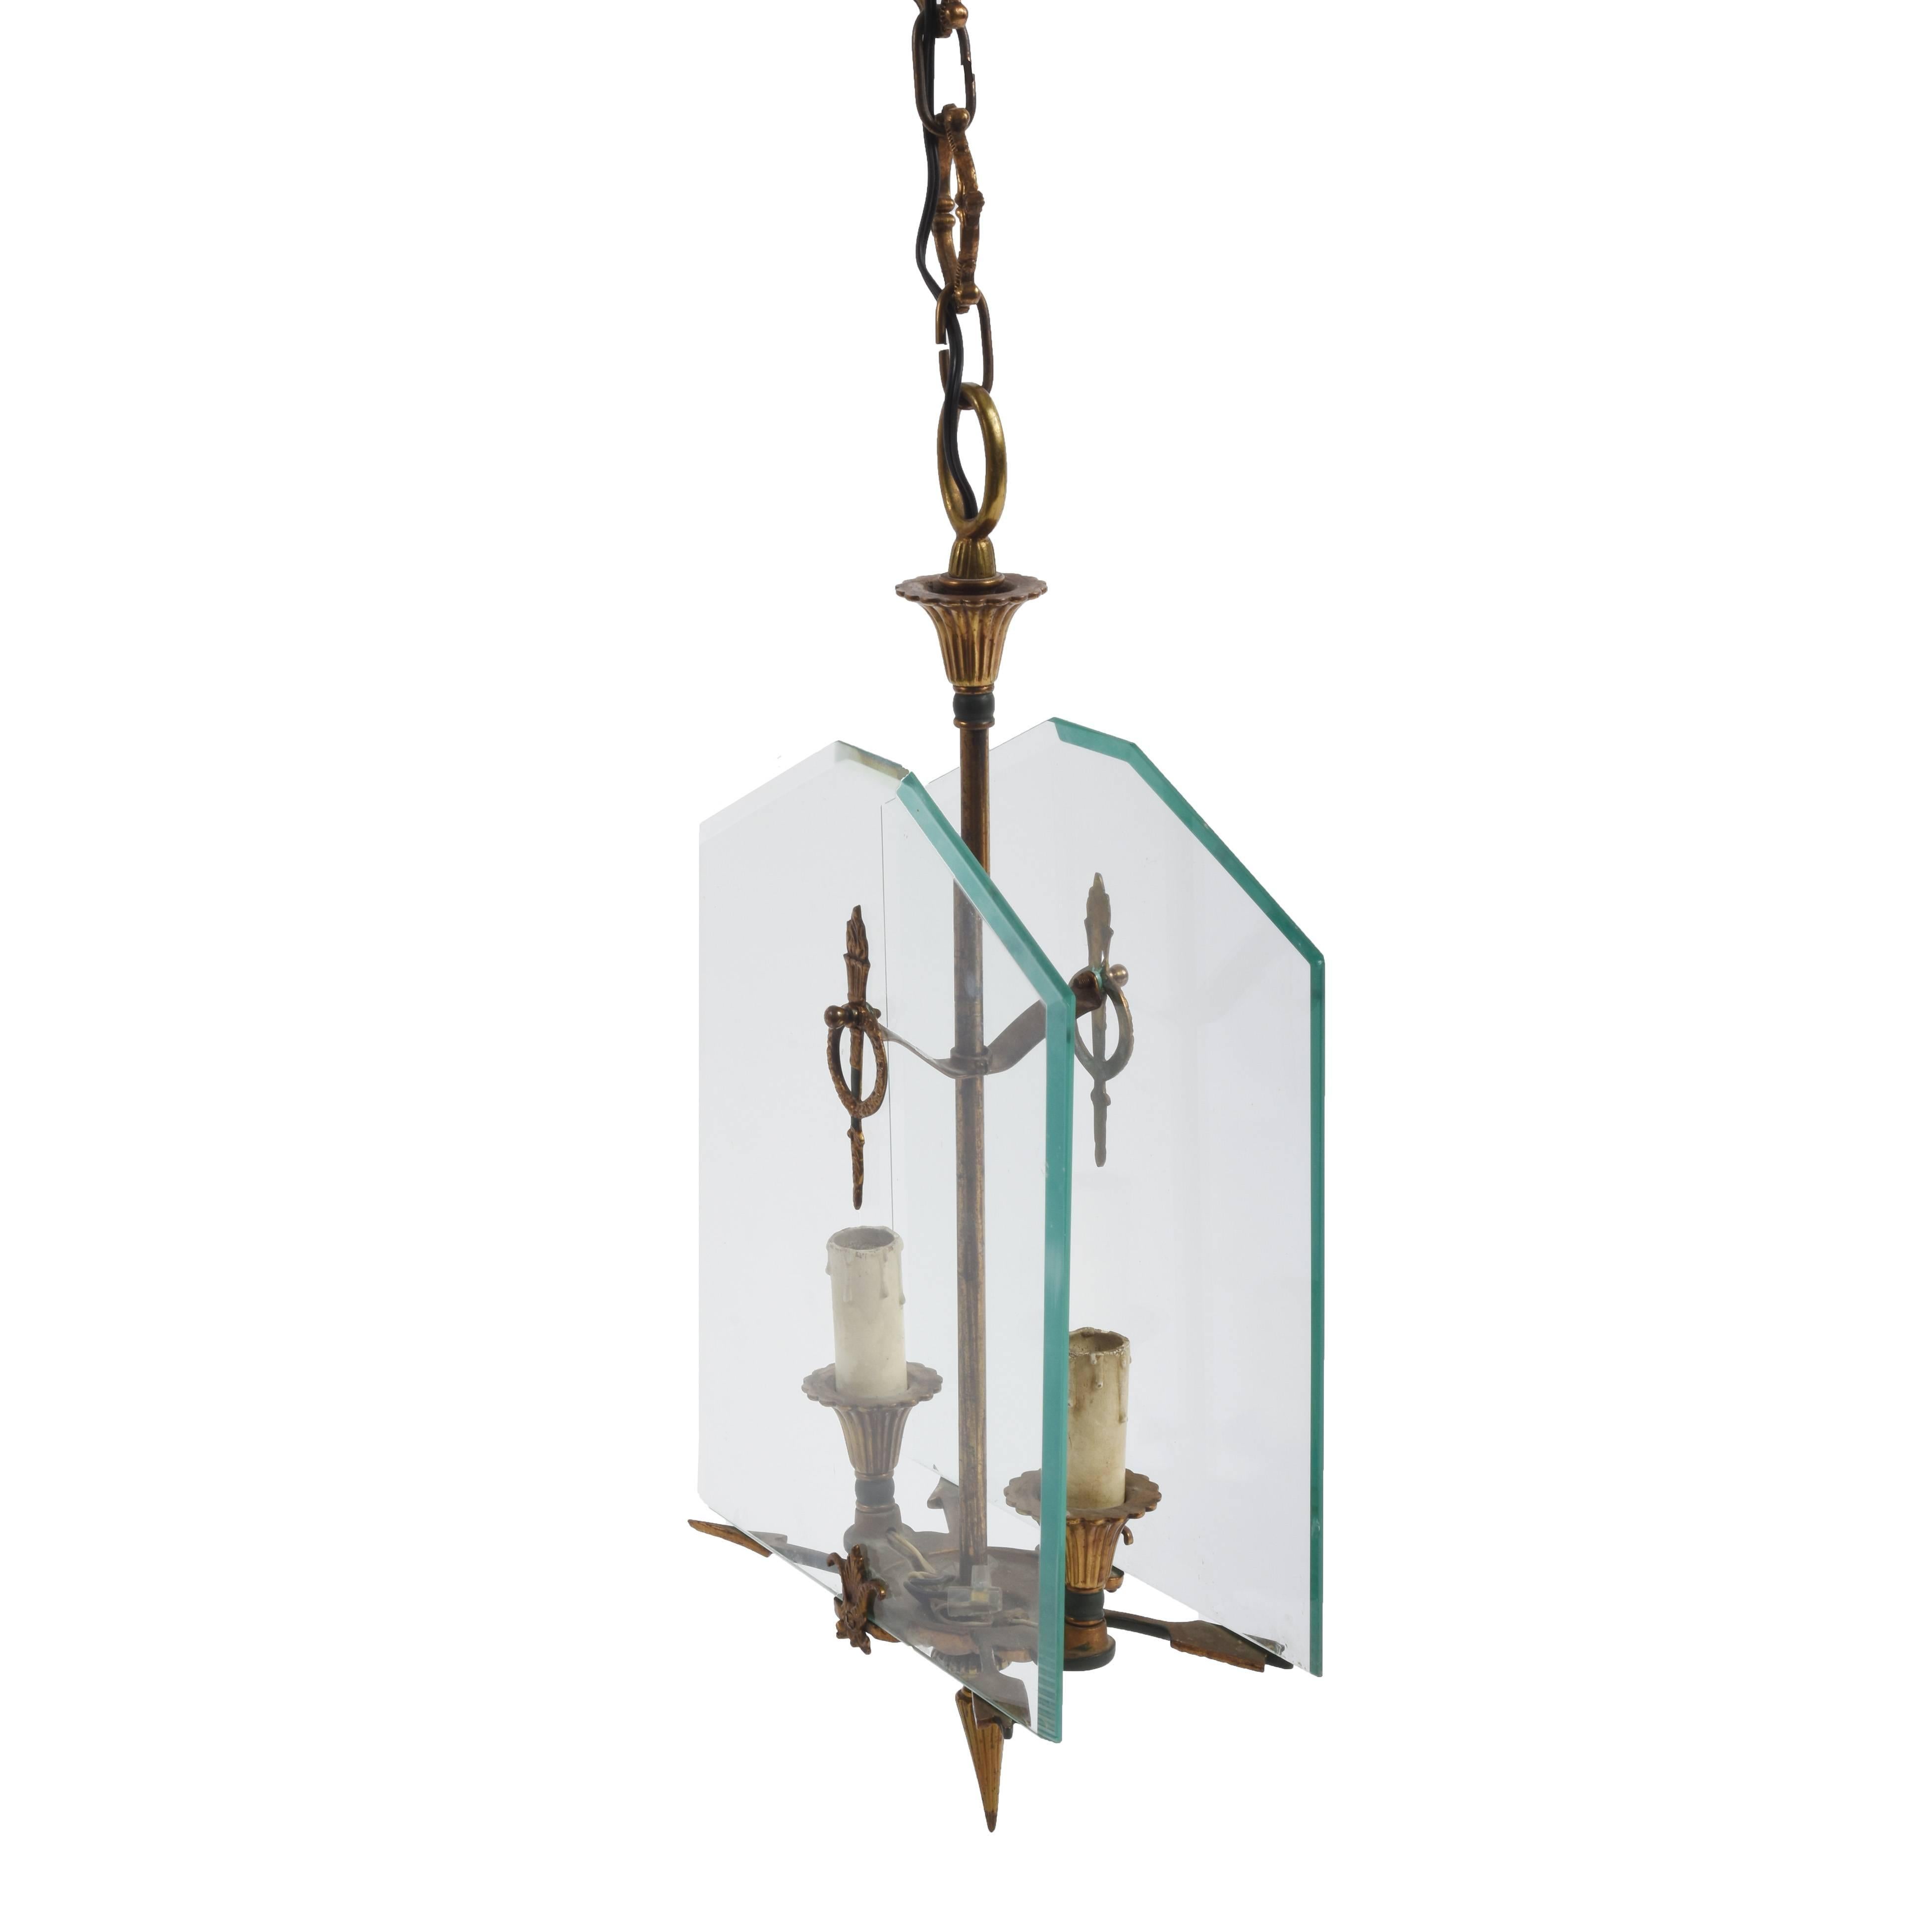 Two-light chandelier in enameled gilded bronze and Directoire style glass.

This item is in the style of Fontana Arte, a leading lighting production and design company during the 1930s. You can find clearly elements of inspiration by watching how